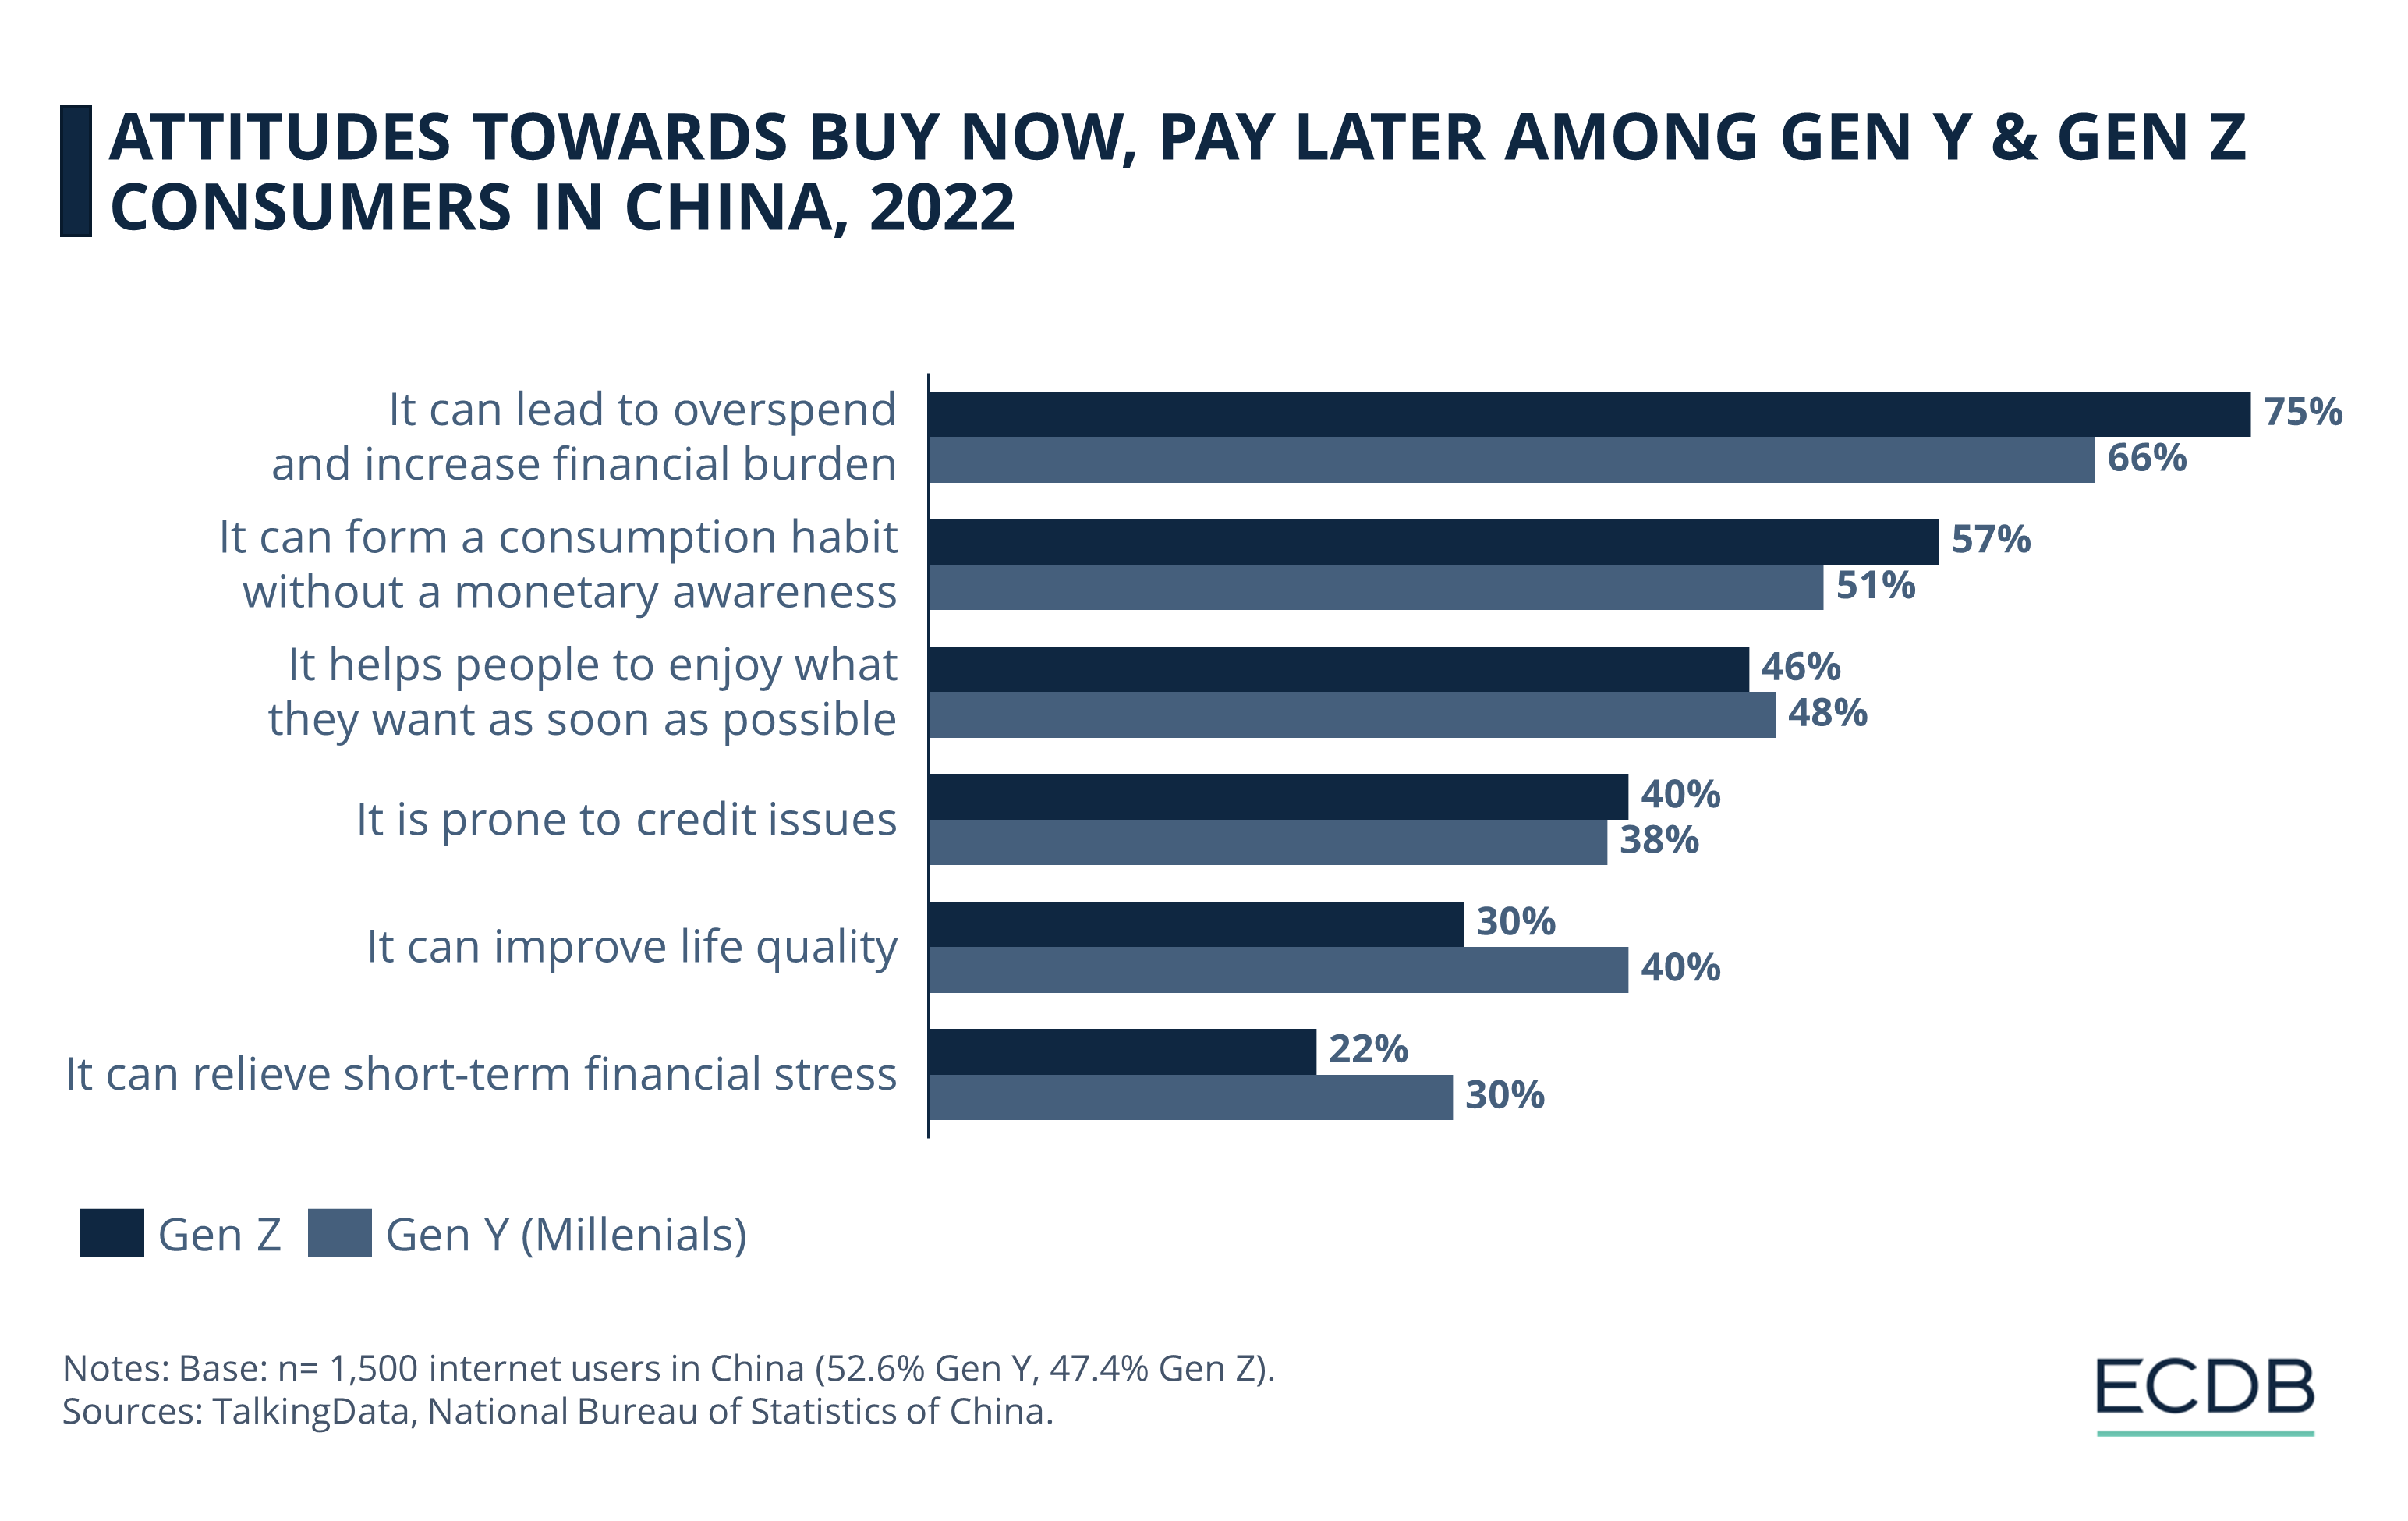 Attitudes Towards Buy Now, Pay Later Among Gen Y & Gen Z Consumers in China, 2022